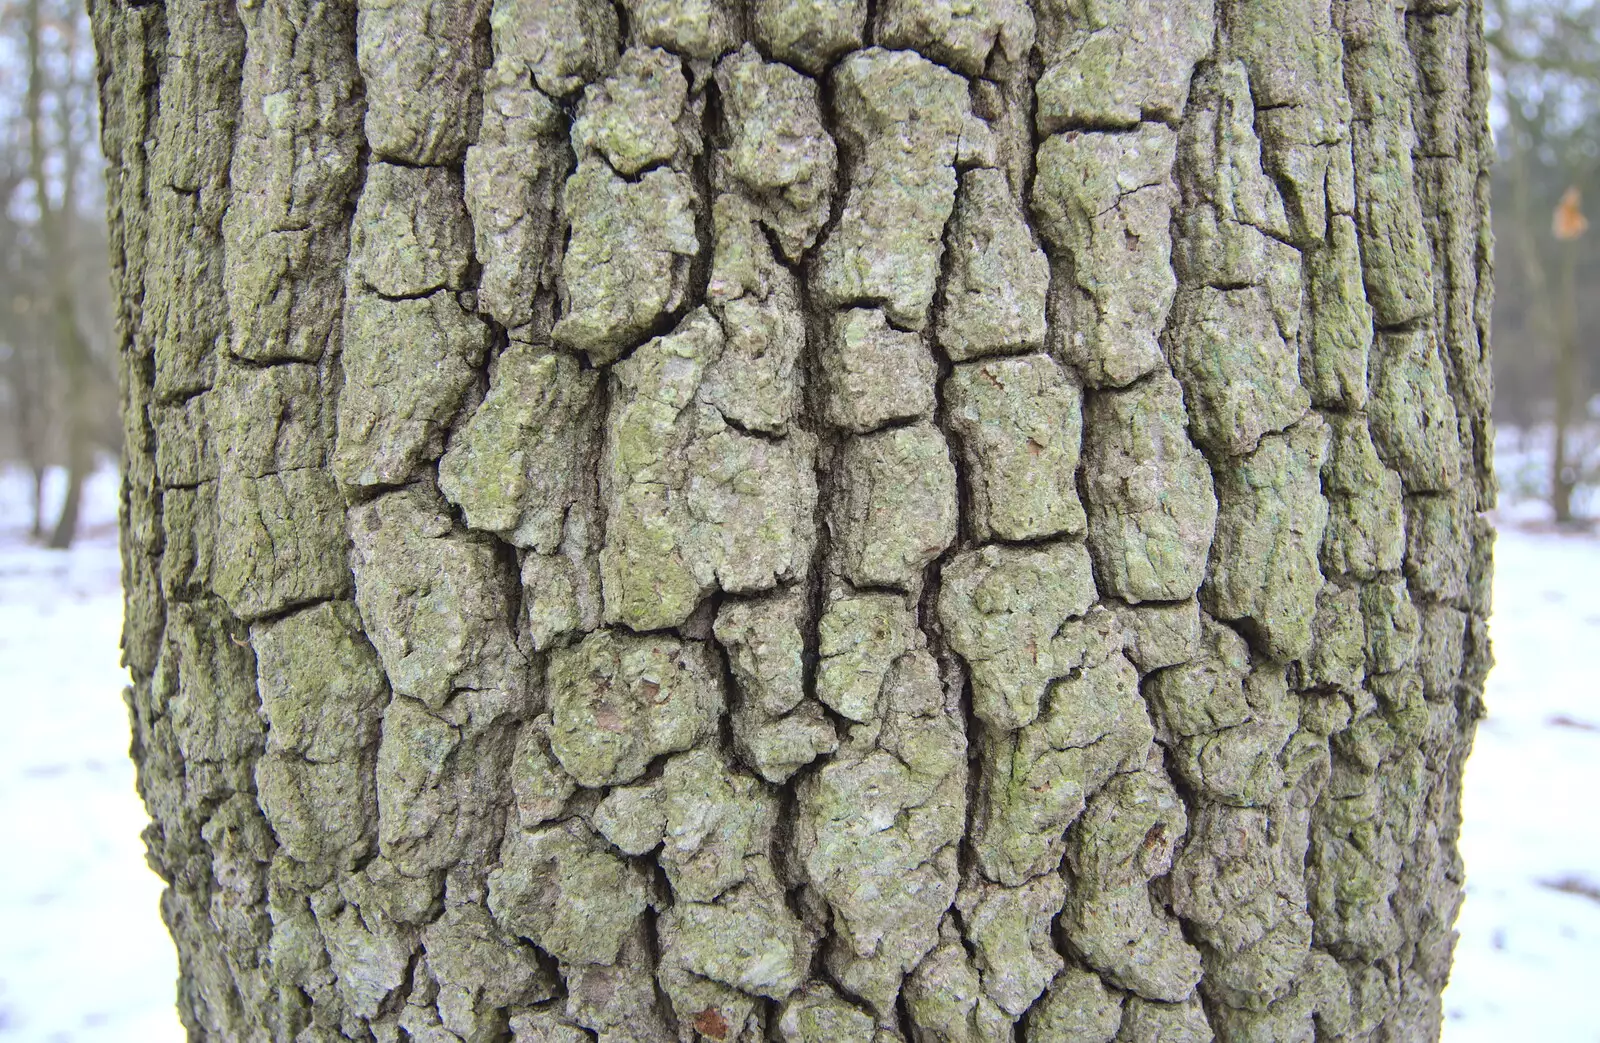 Chunky tree bark, from Winter Walks with Sis and Matt, Brome and Thornham, Suffolk - 11th February 2012